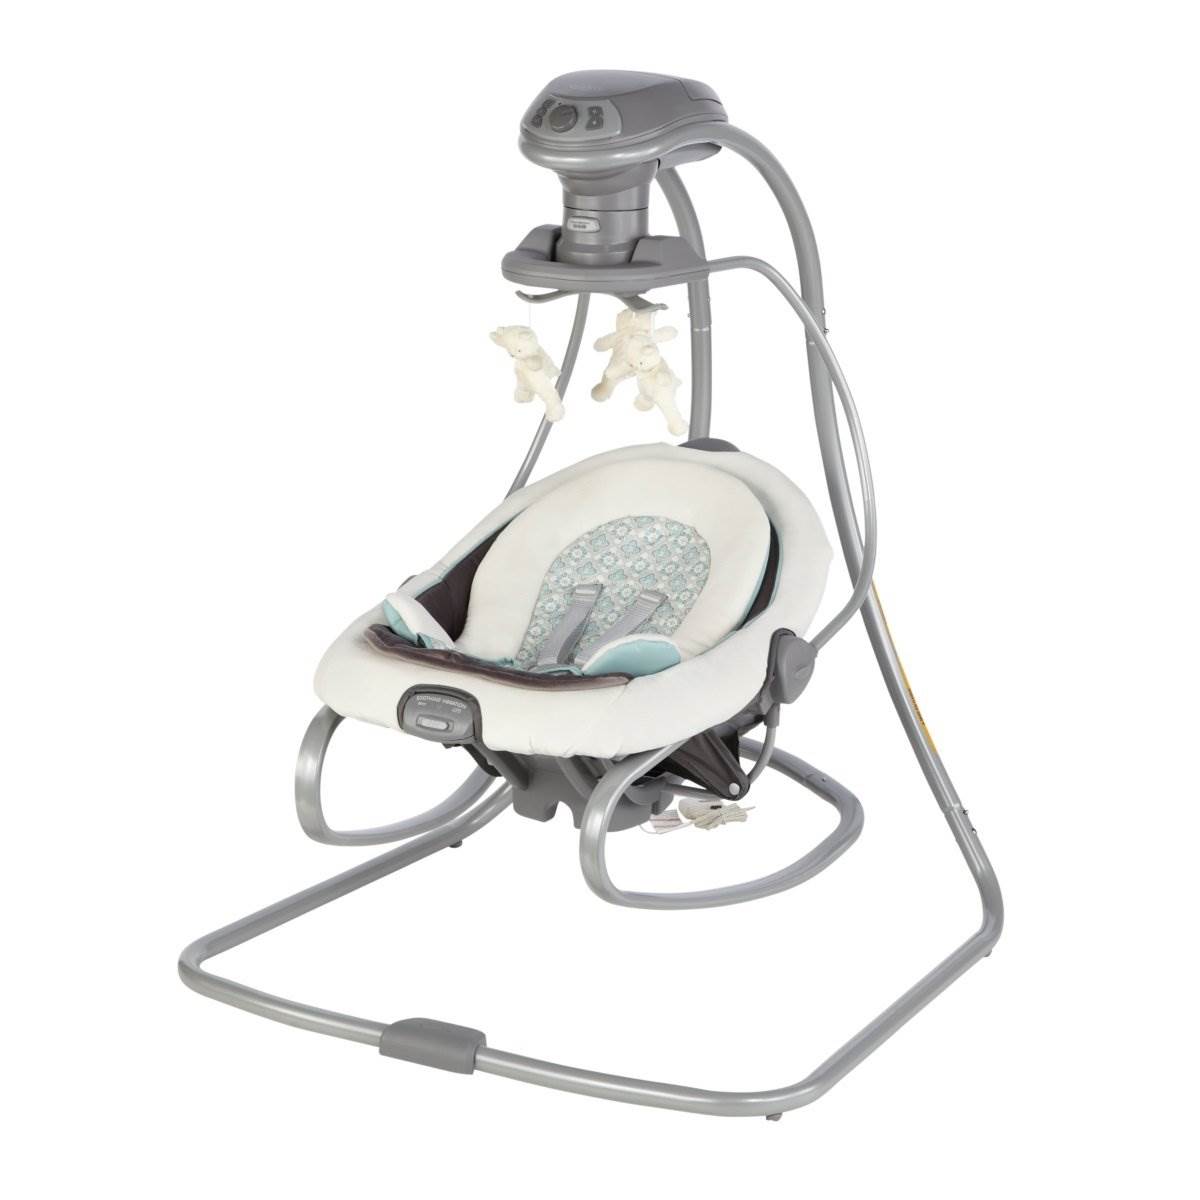 Graco DuetSoothe LX Infant Baby Swing and Rocker – Winslet | 1852655 - image 1 of 12